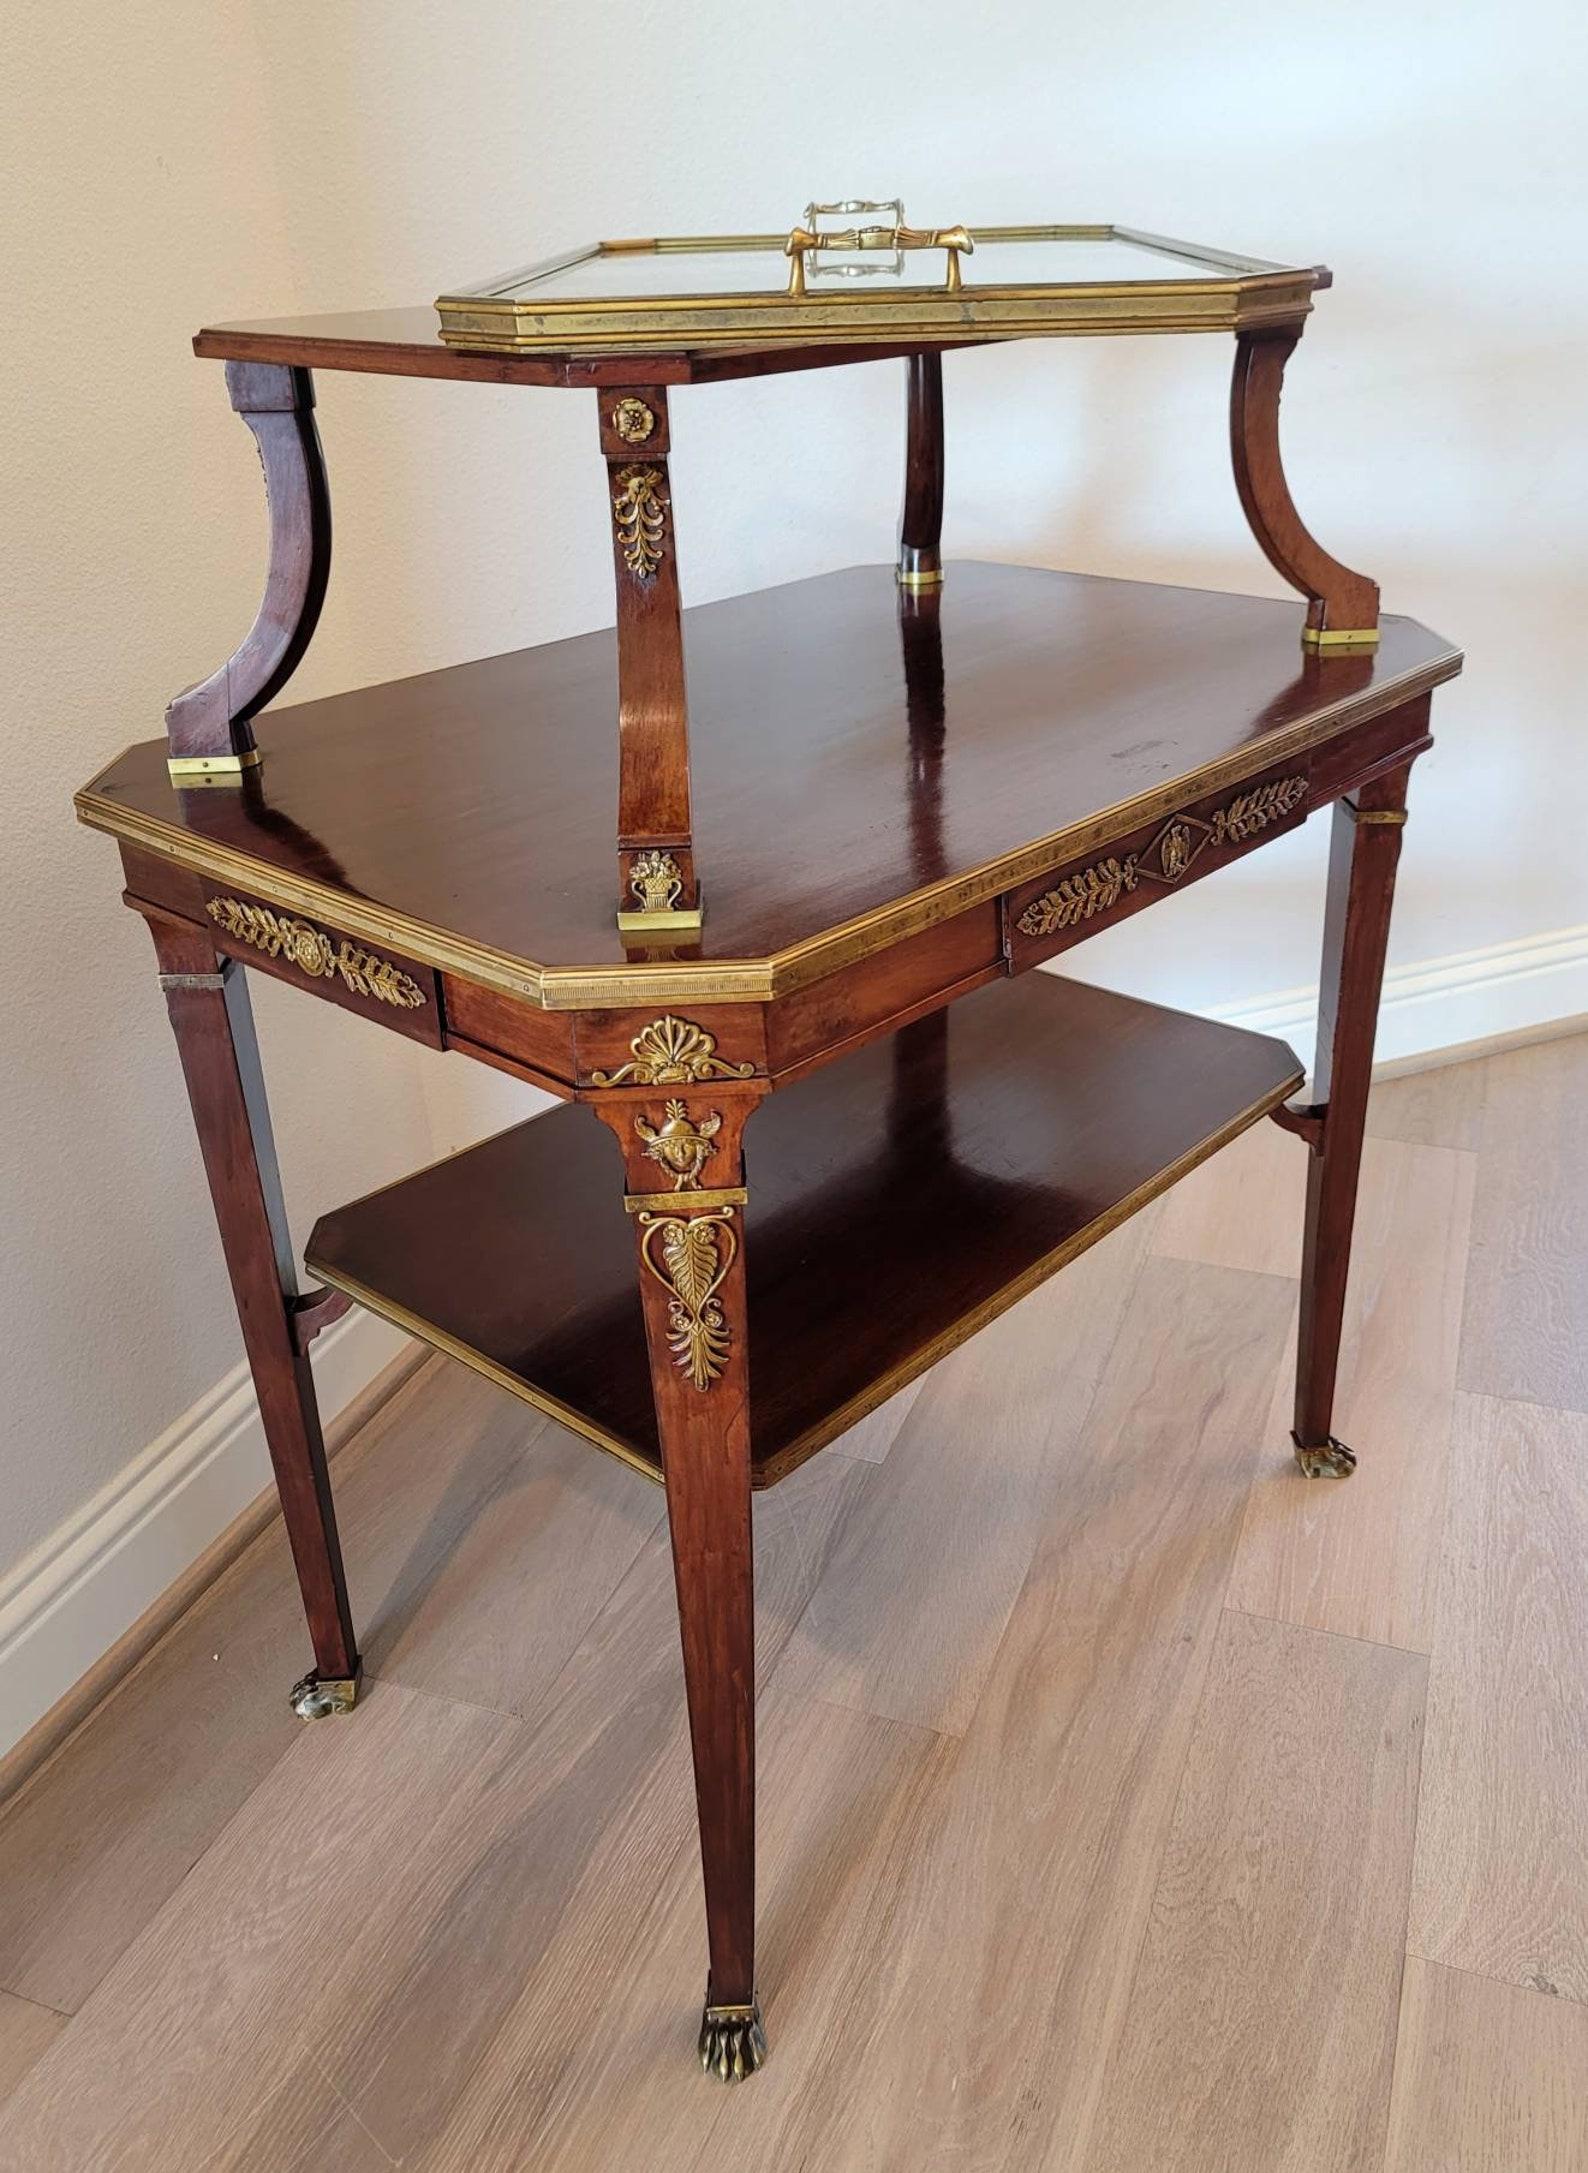 Louis XVI Krieger Signed Antique French Empire Tiered Tea Tray Table For Sale